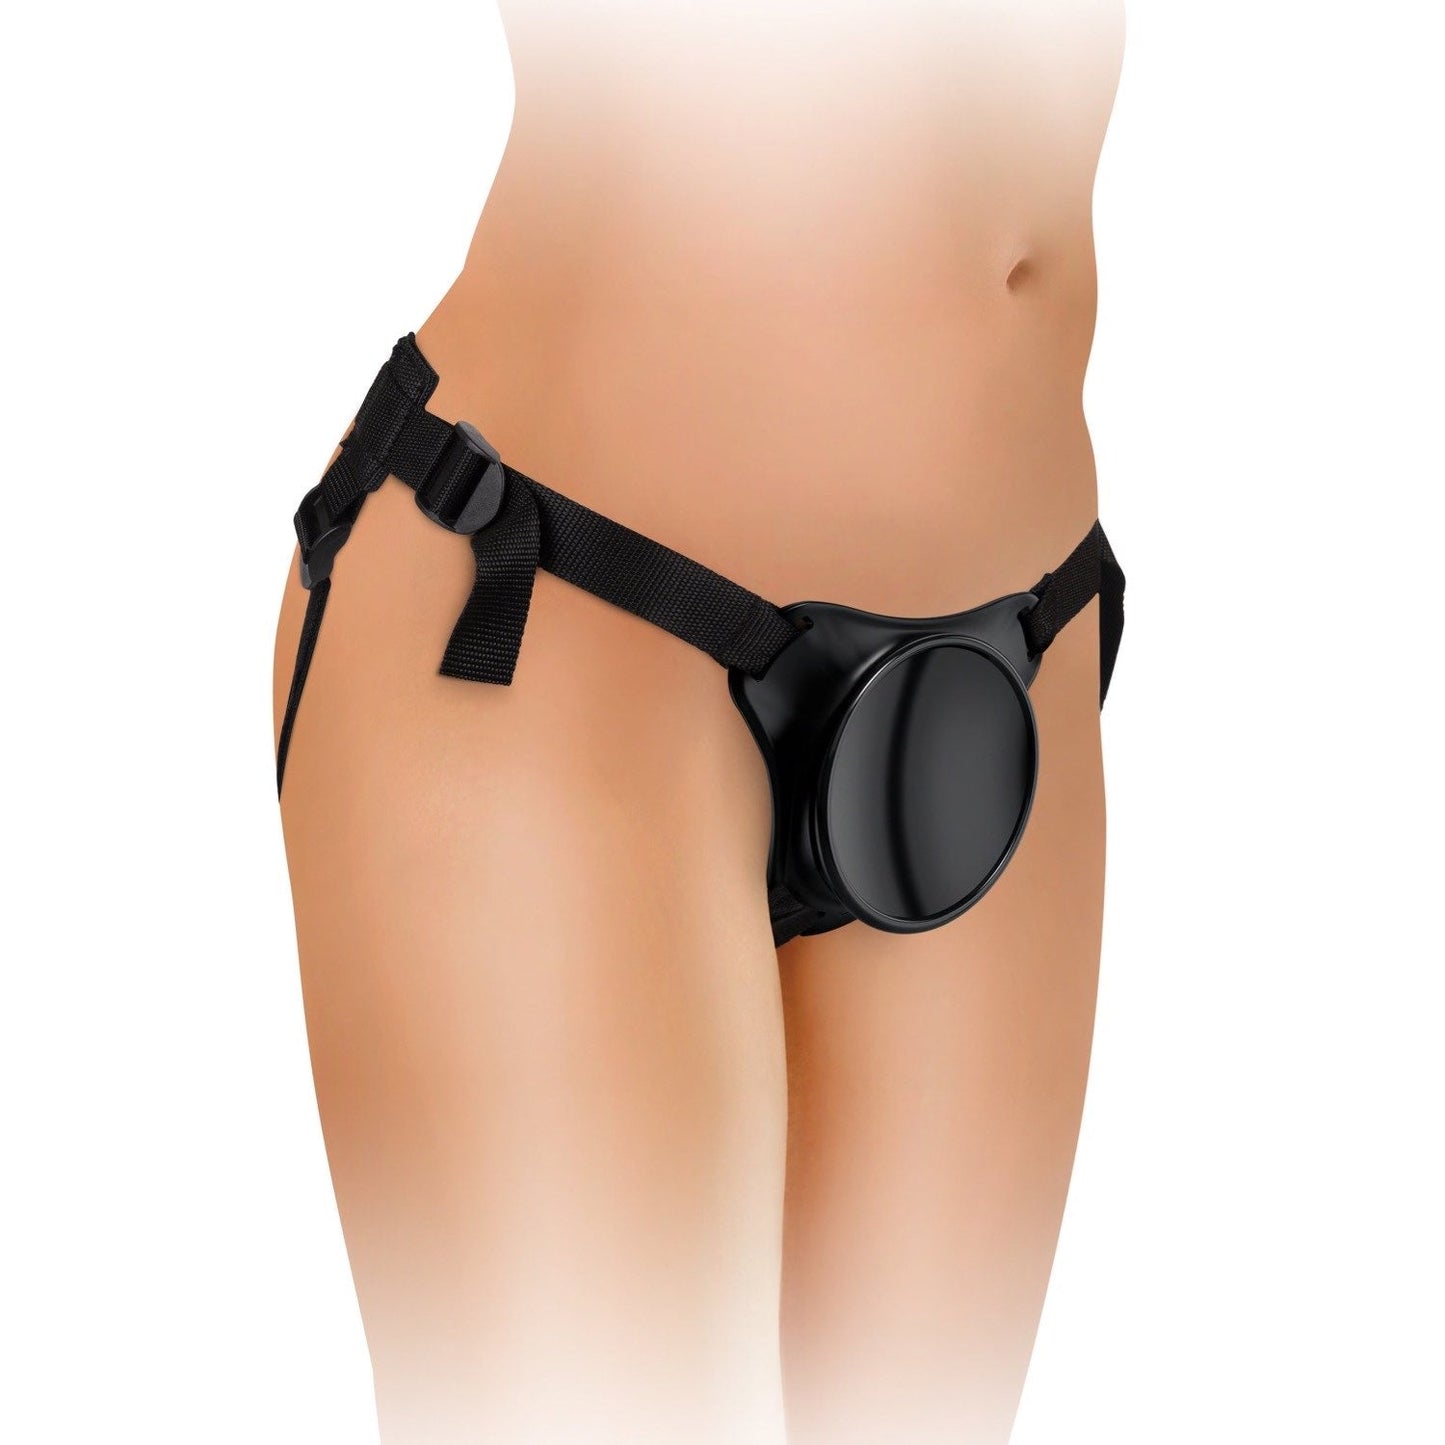 Elite Beginner's Silicone Body Dock Kit - Body Dock Strap-On Harness with 15.2 cm Dong